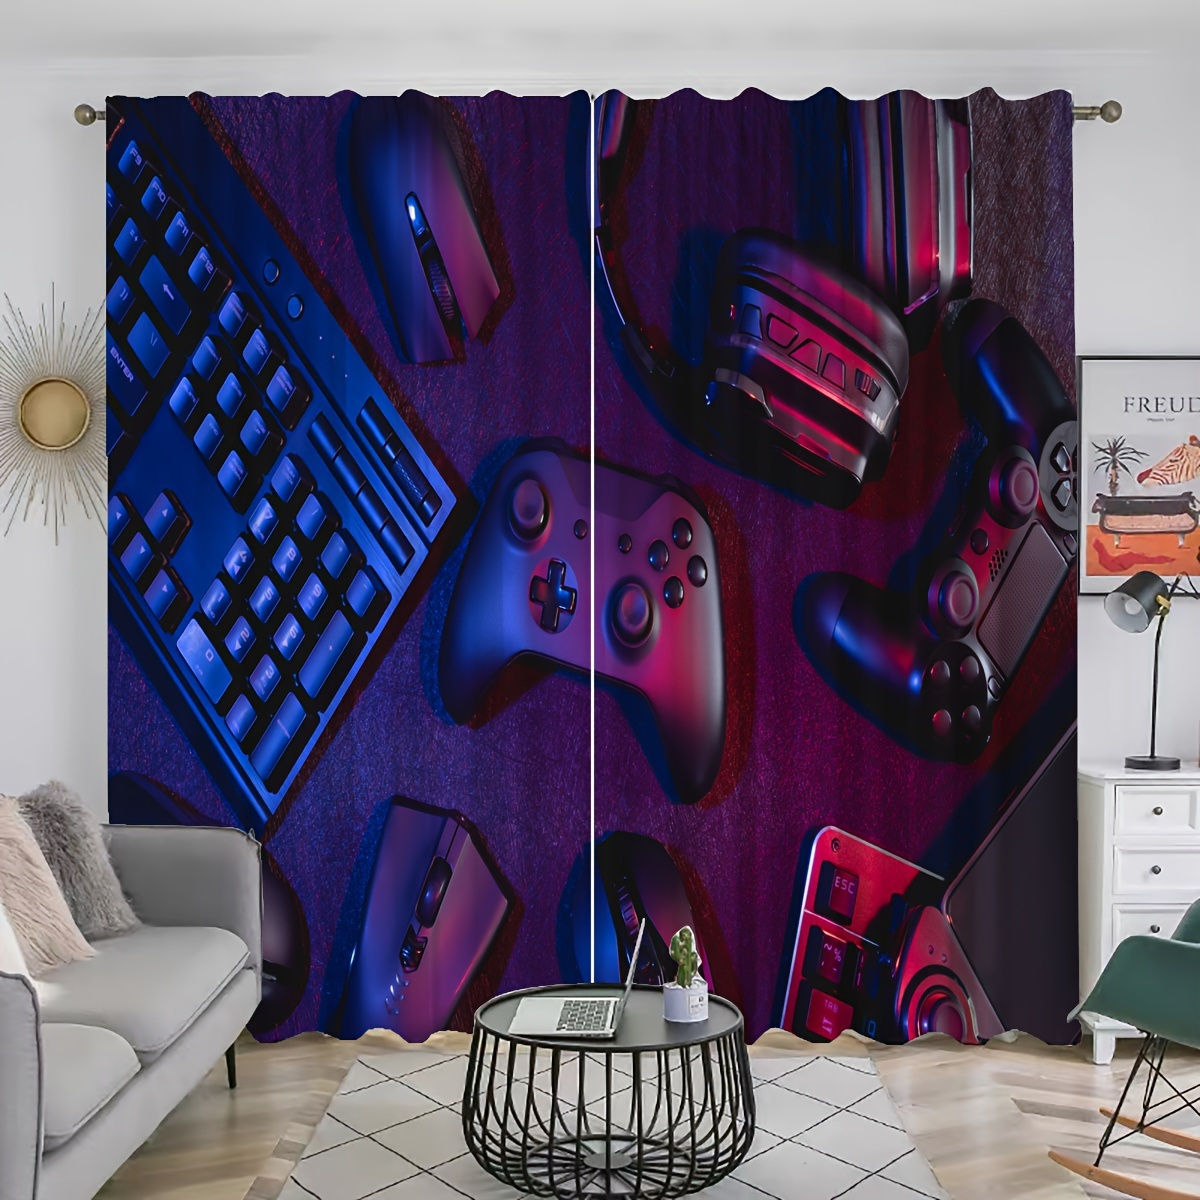 

2pcs E-sports Curtains For Gaming Rooms, Rod Pocket Curtain, Suitable For Restaurants, Public Places, Living Rooms, Bedrooms, Offices, Study Rooms, And Gaming Rooms, Home Decoration